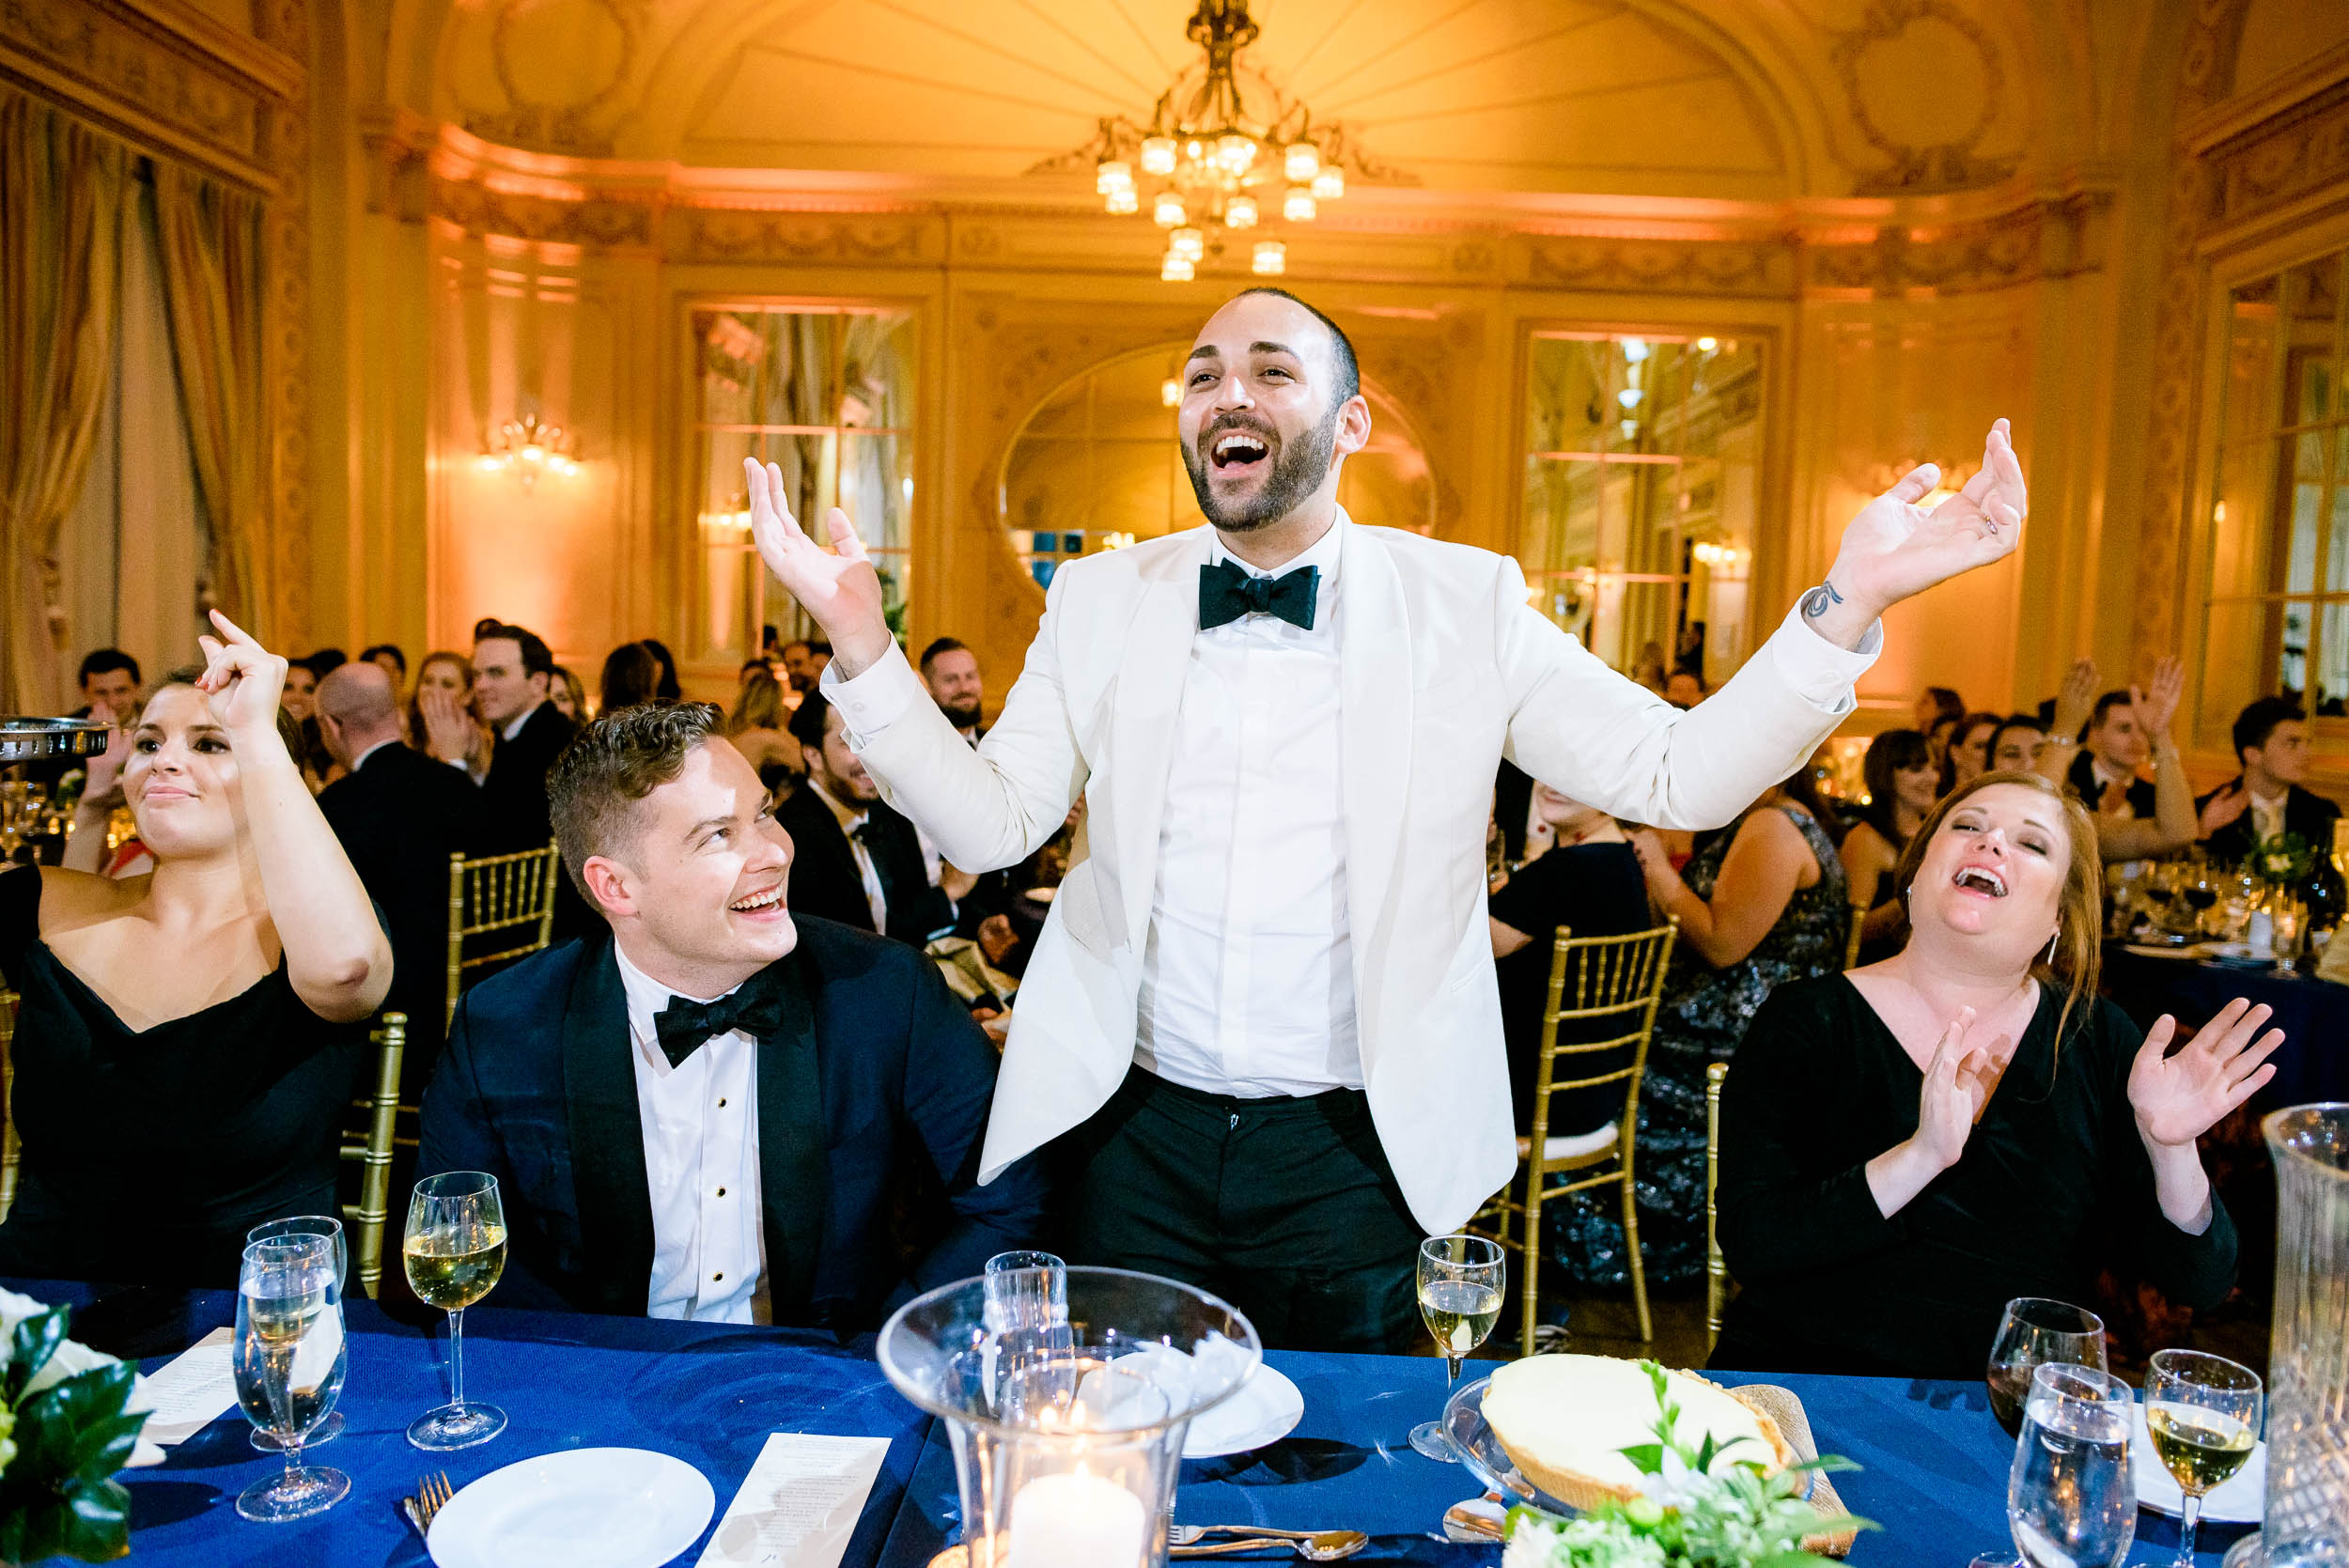 Fun wedding moments at luxurious fall wedding at the Chicago Symphony Center captured by J. Brown Photography. See more wedding ideas at jbrownphotography.com!